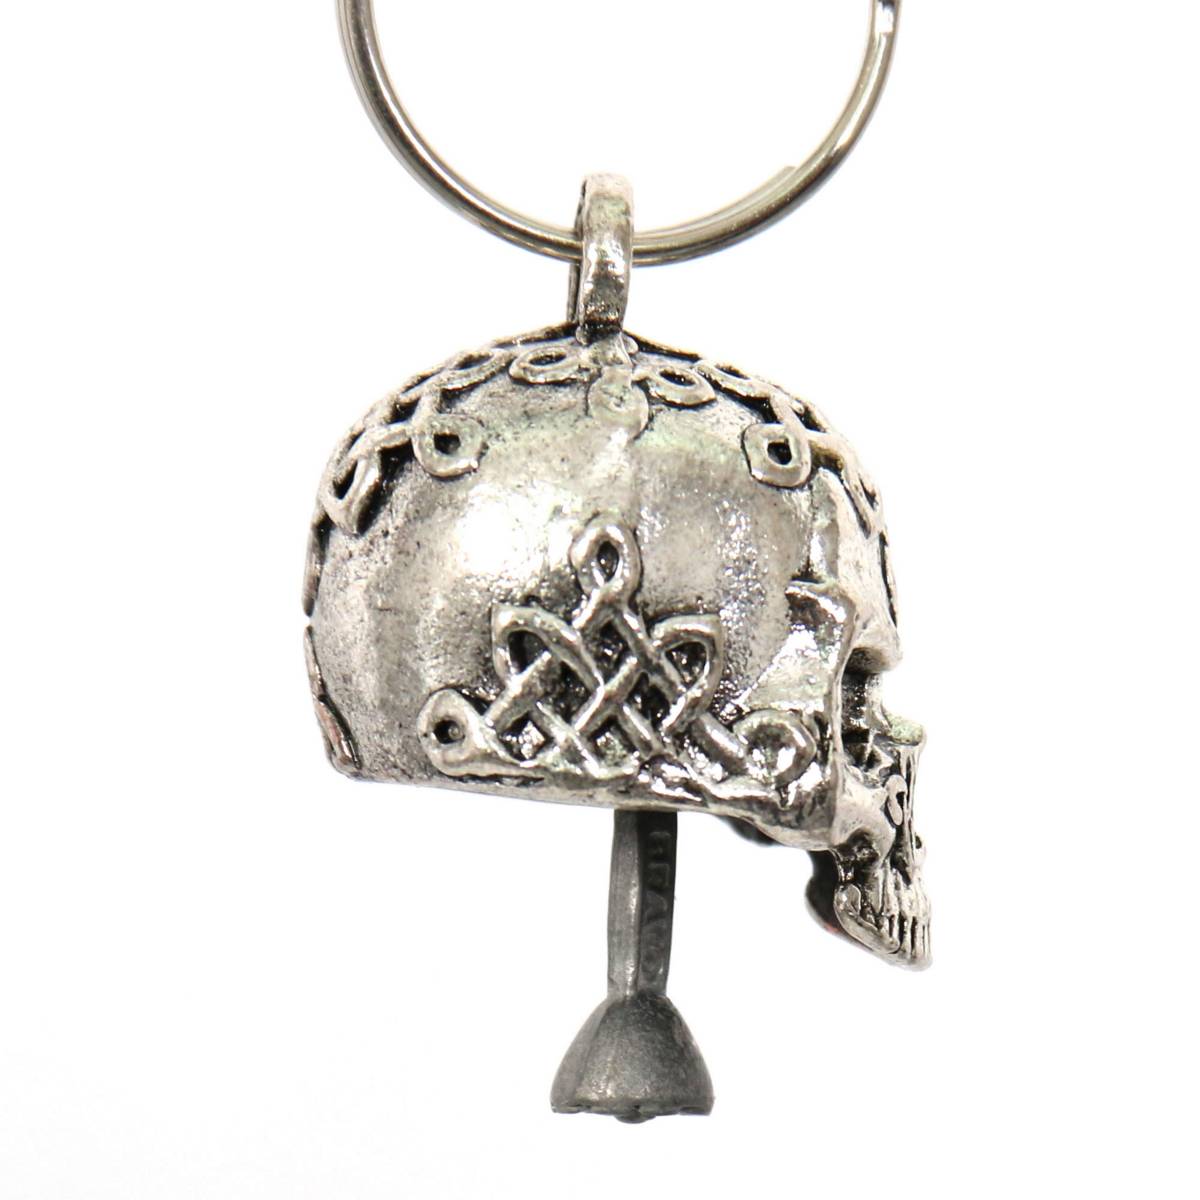 Milwaukee Leather MLB9037 'Male Sugar Skull' Motorcycle Good Luck Bell | Key Chain Accessory for Bikers